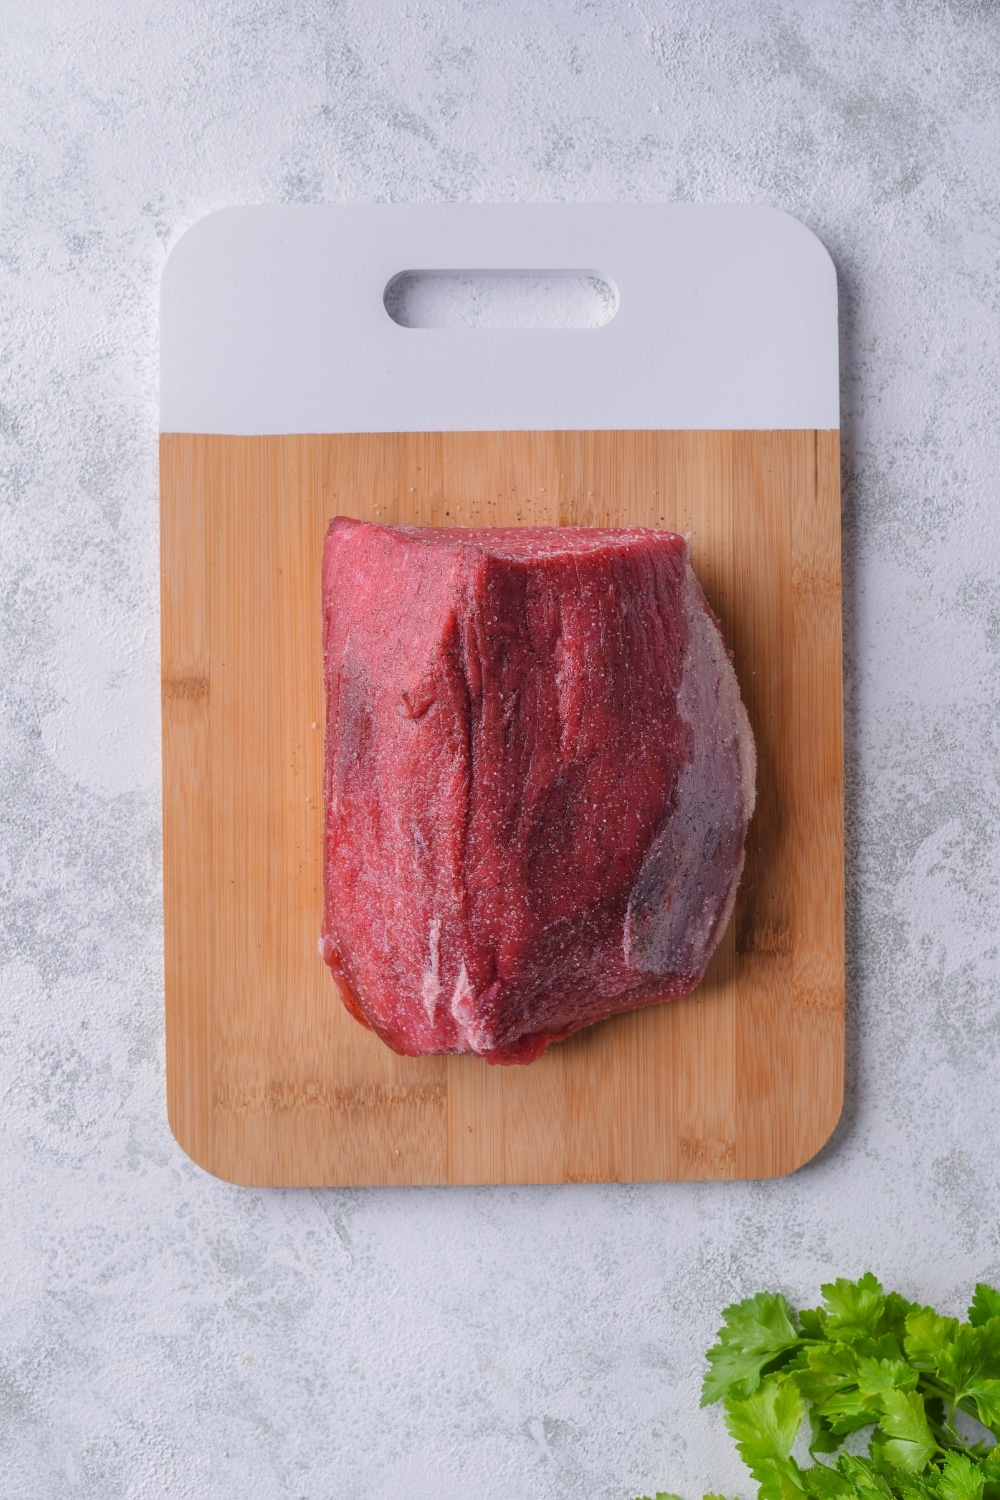 A raw eye of round steak on a wooden cutting board with a white handle.